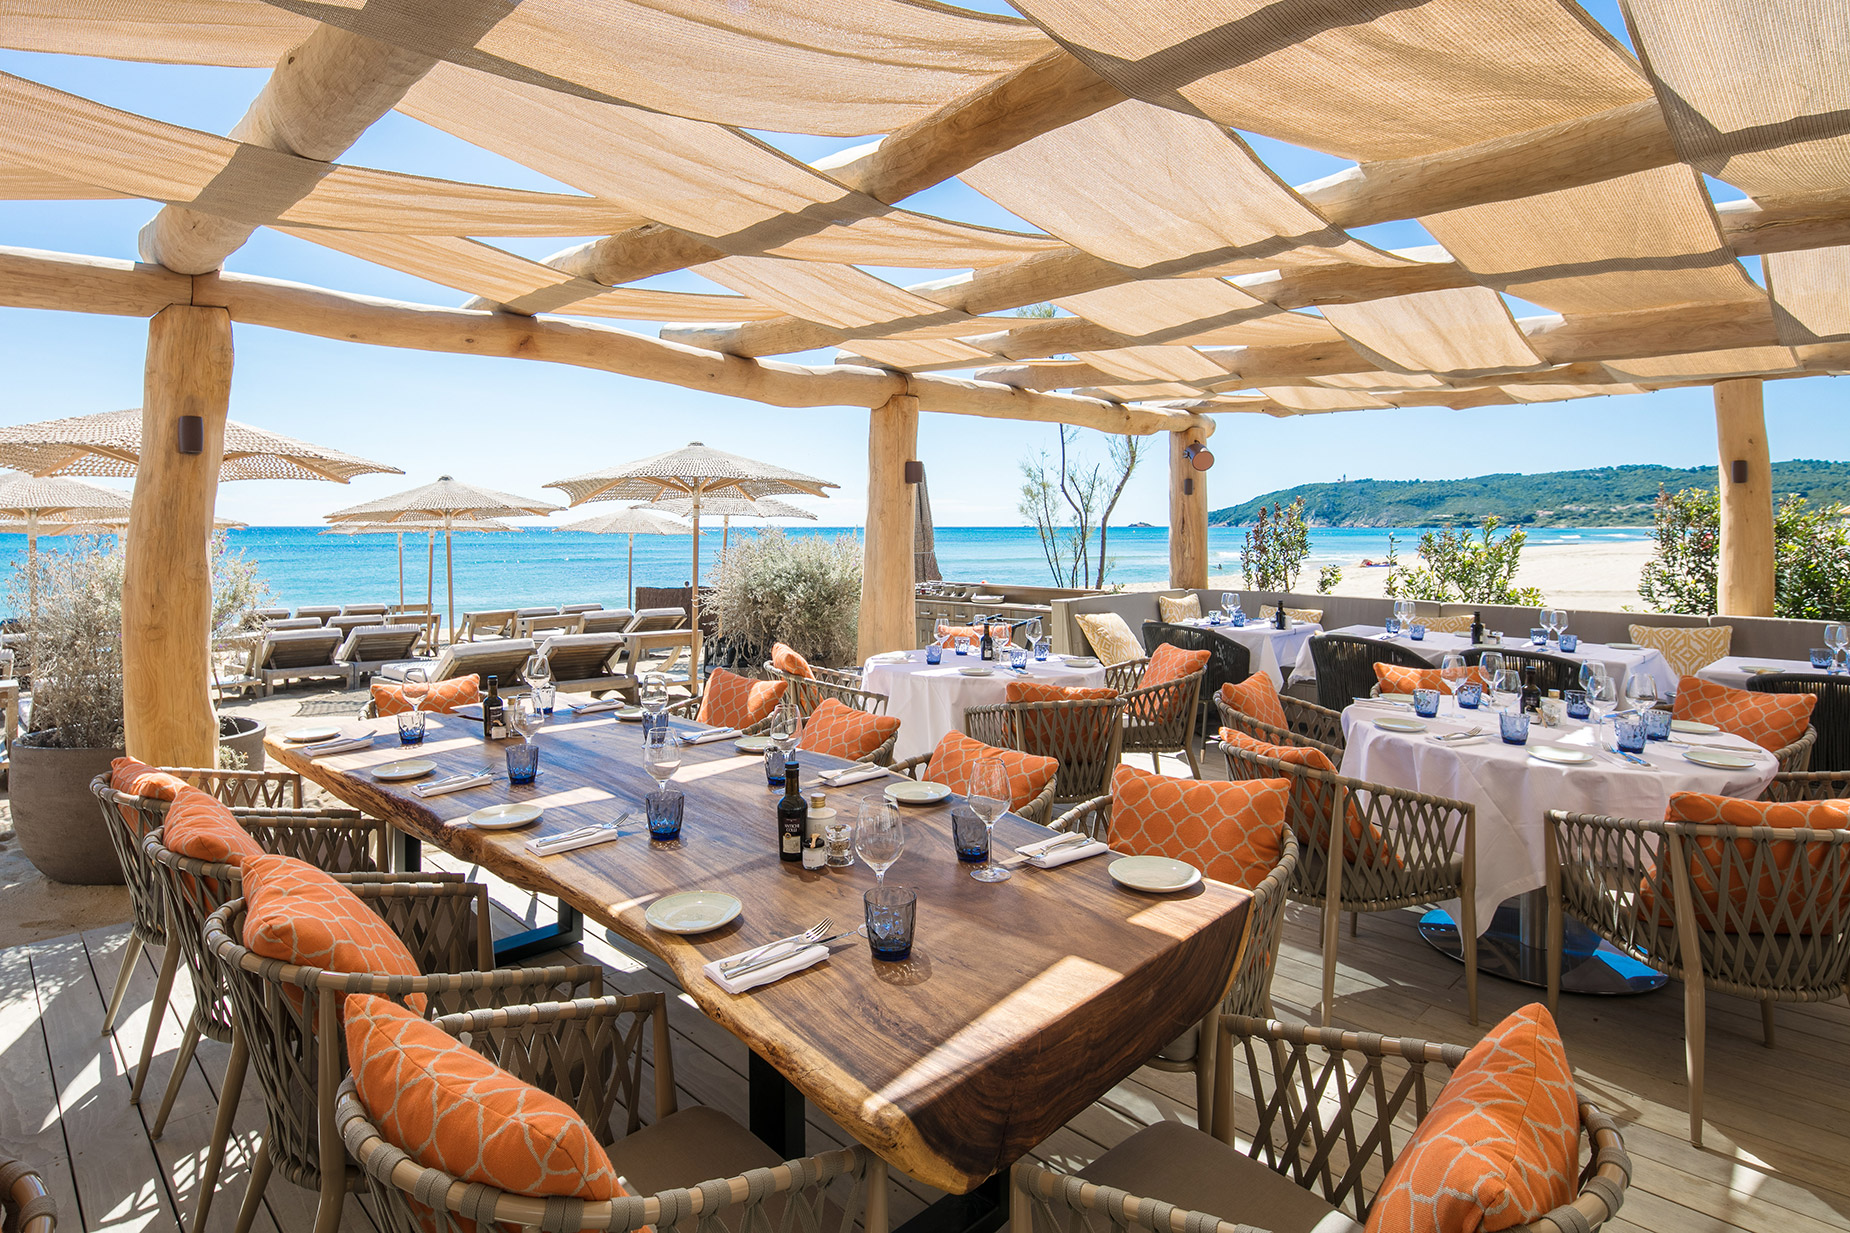 Will Pampelonne Beach St Tropez Ever Rule the World?